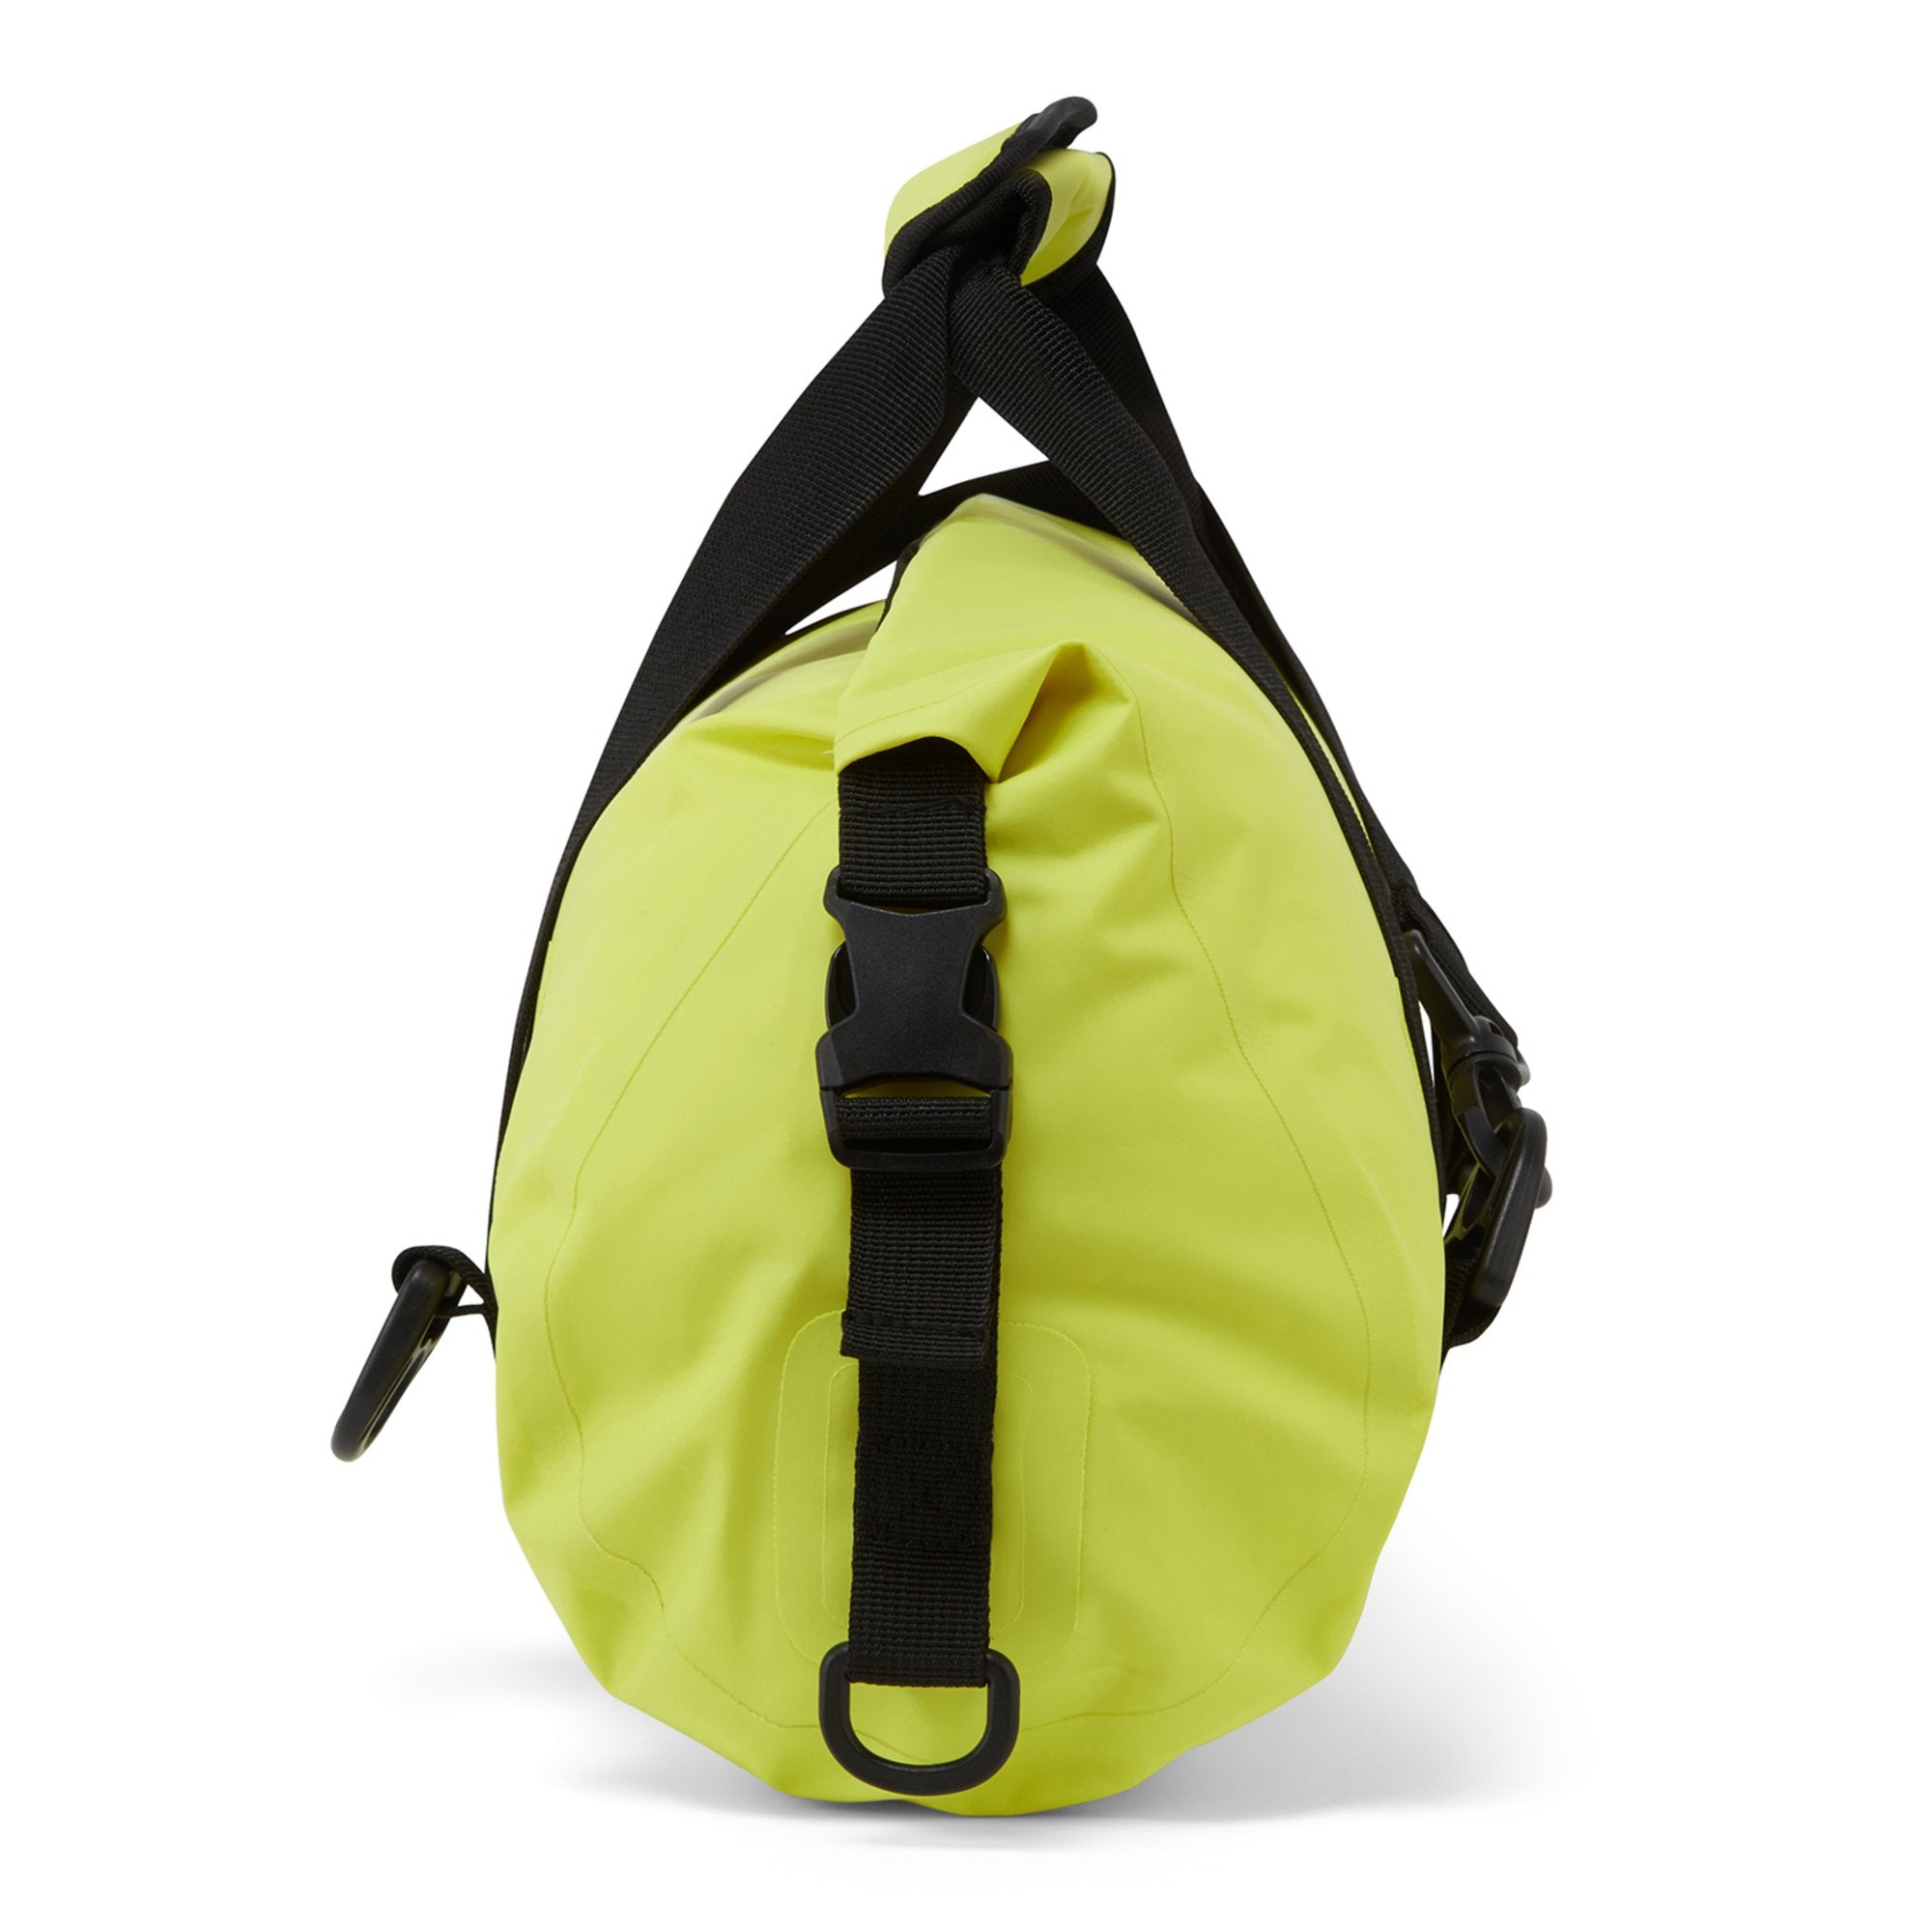 Gill 10L Voyager Duffel Bag - Special Edition